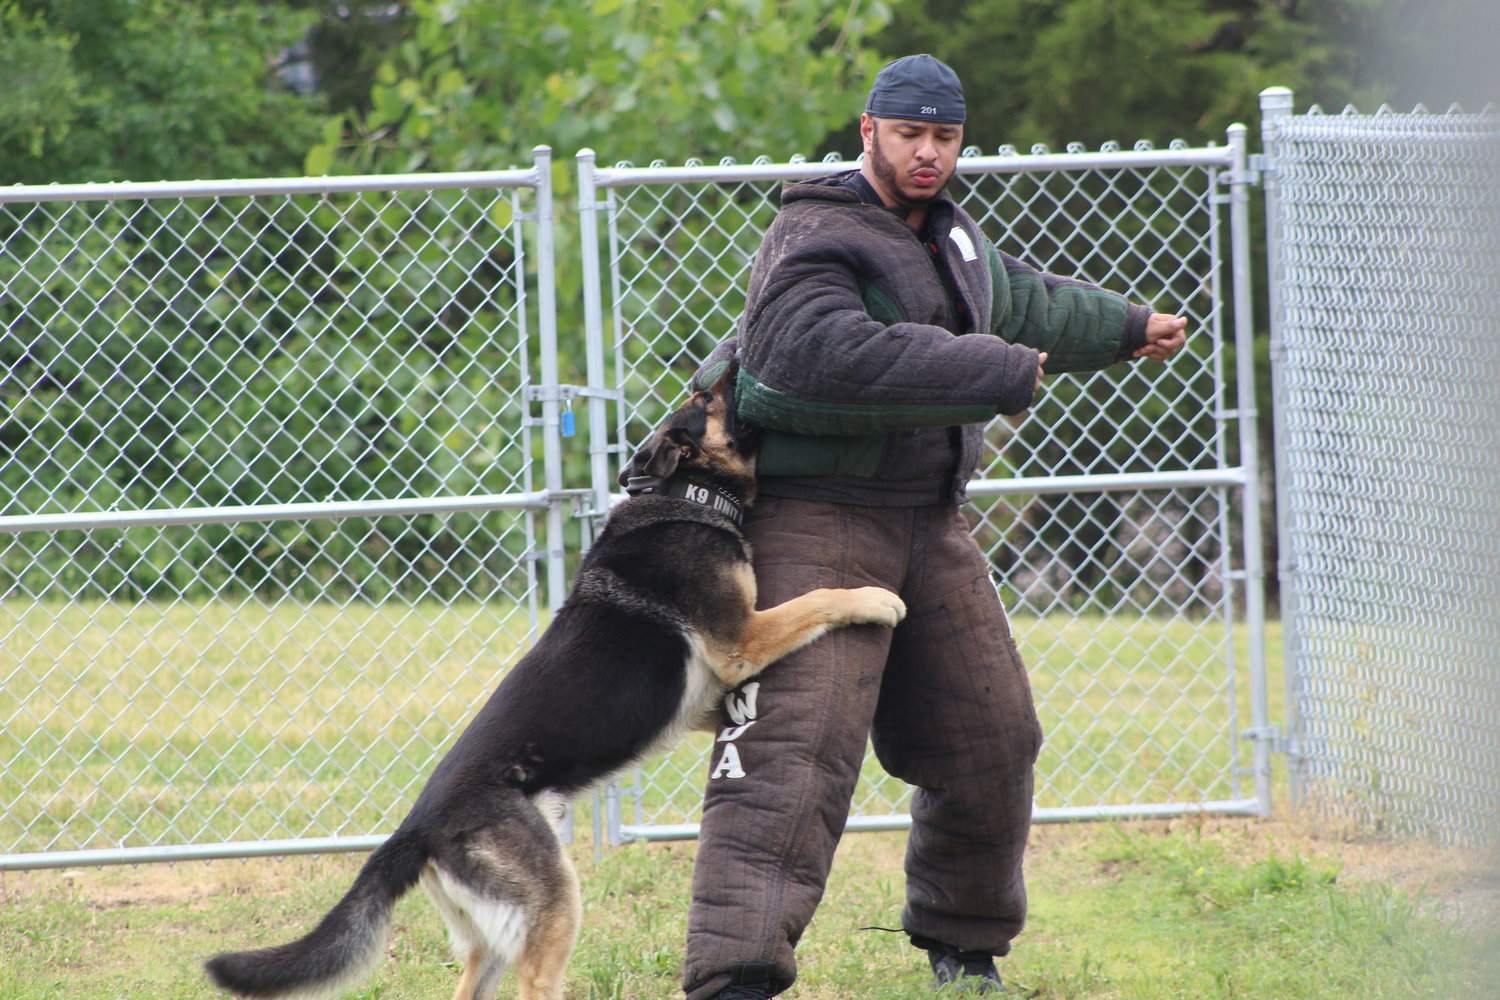 Crawfordsville Patrol Officer Michael Ives takes part in the aggression training course with fellow officer Michael Plant and his K-9, Barrett.